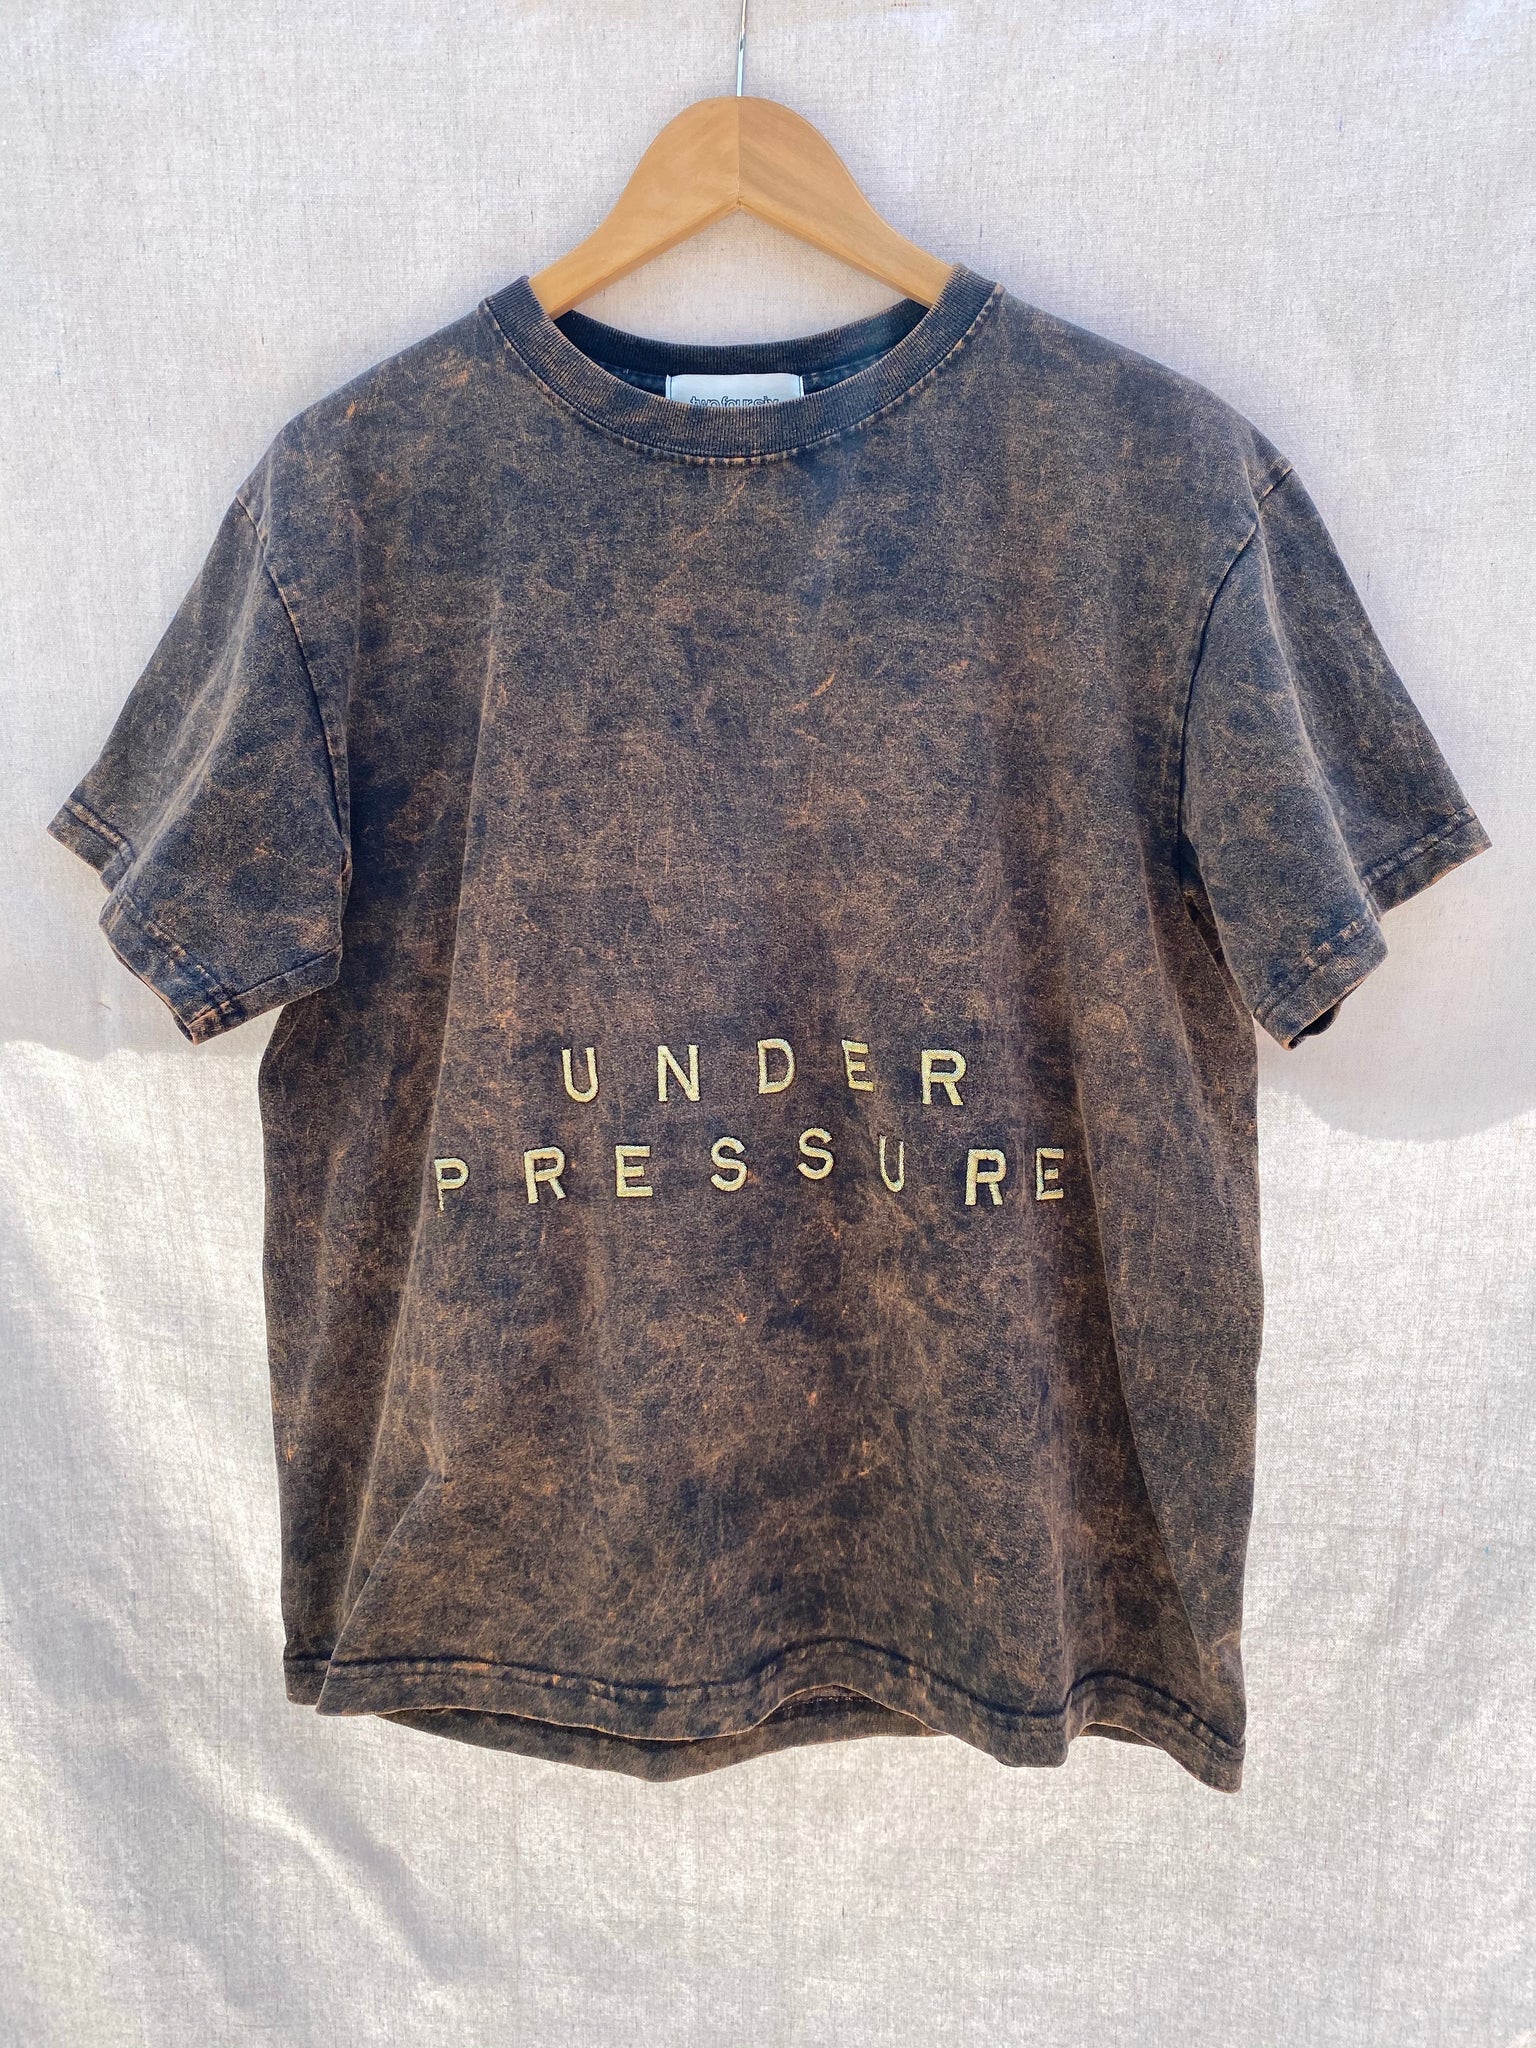 FULL FRONT VIEW OF T-SHIRT WITH UNDER PRESSURE EMBROIDERY.